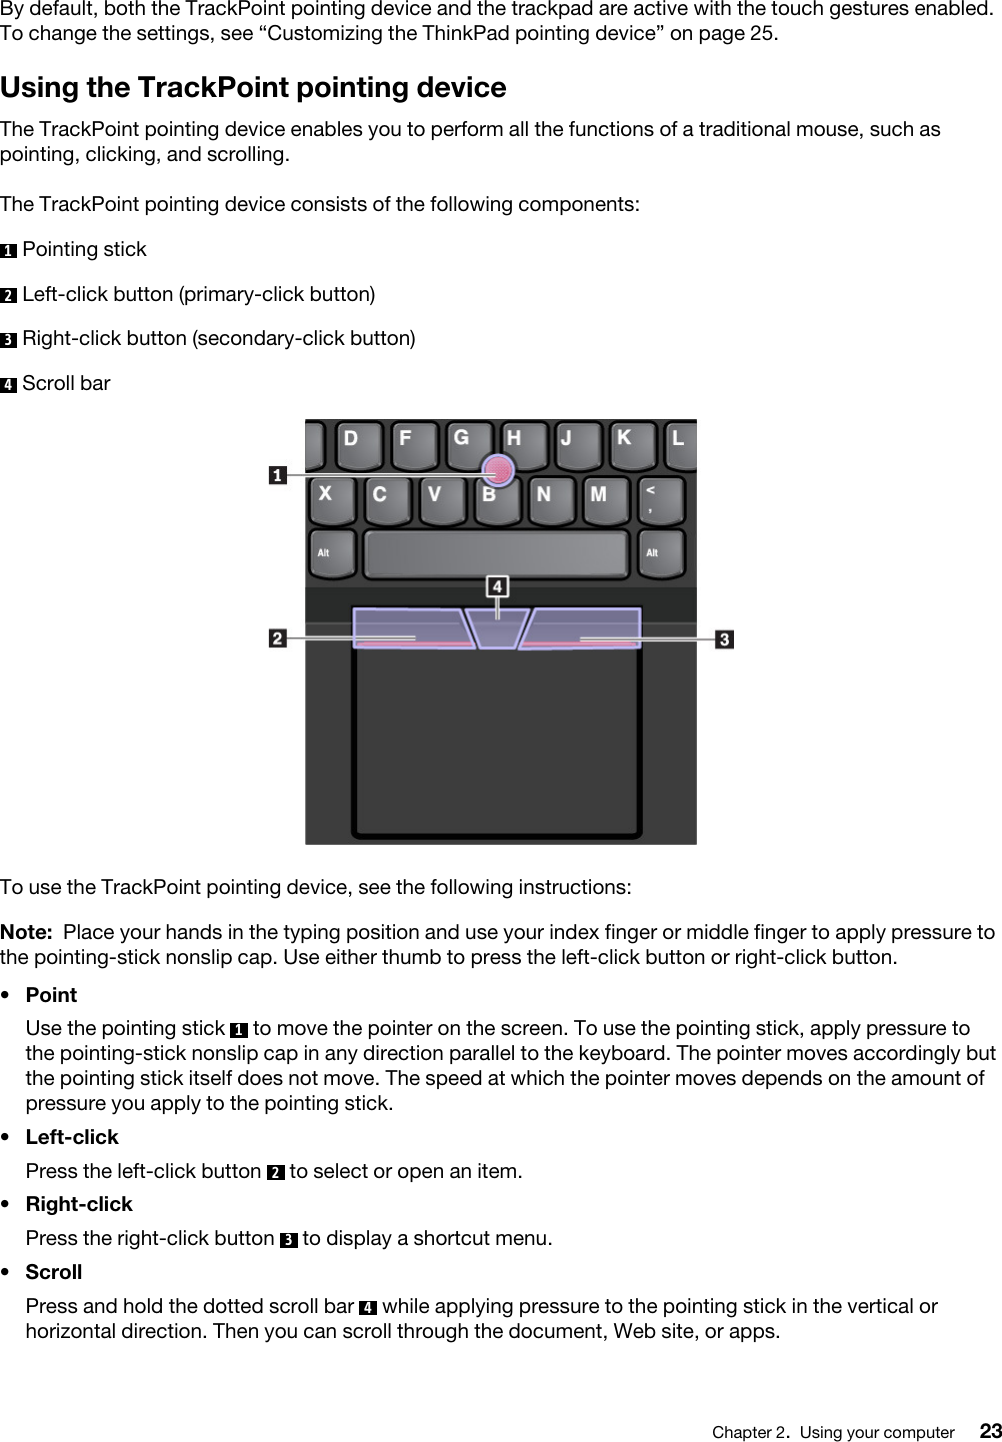 By default, both the TrackPoint pointing device and the trackpad are active with the touch gestures enabled. To change the settings, see “Customizing the ThinkPad pointing device” on page 25.Using the TrackPoint pointing deviceThe TrackPoint pointing device enables you to perform all the functions of a traditional mouse, such as pointing, clicking, and scrolling.The TrackPoint pointing device consists of the following components:1  Pointing stick2  Left-click button (primary-click button)3  Right-click button (secondary-click button)4  Scroll barTo use the TrackPoint pointing device, see the following instructions: Note: Place your hands in the typing position and use your index finger or middle finger to apply pressure to the pointing-stick nonslip cap. Use either thumb to press the left-click button or right-click button.•  Point Use the pointing stick  1  to move the pointer on the screen. To use the pointing stick, apply pressure to the pointing-stick nonslip cap in any direction parallel to the keyboard. The pointer moves accordingly but the pointing stick itself does not move. The speed at which the pointer moves depends on the amount of pressure you apply to the pointing stick.•  Left-clickPress the left-click button  2  to select or open an item.•  Right-clickPress the right-click button  3  to display a shortcut menu.•  ScrollPress and hold the dotted scroll bar  4  while applying pressure to the pointing stick in the vertical or horizontal direction. Then you can scroll through the document, Web site, or apps.Chapter 2.Using your computer 23